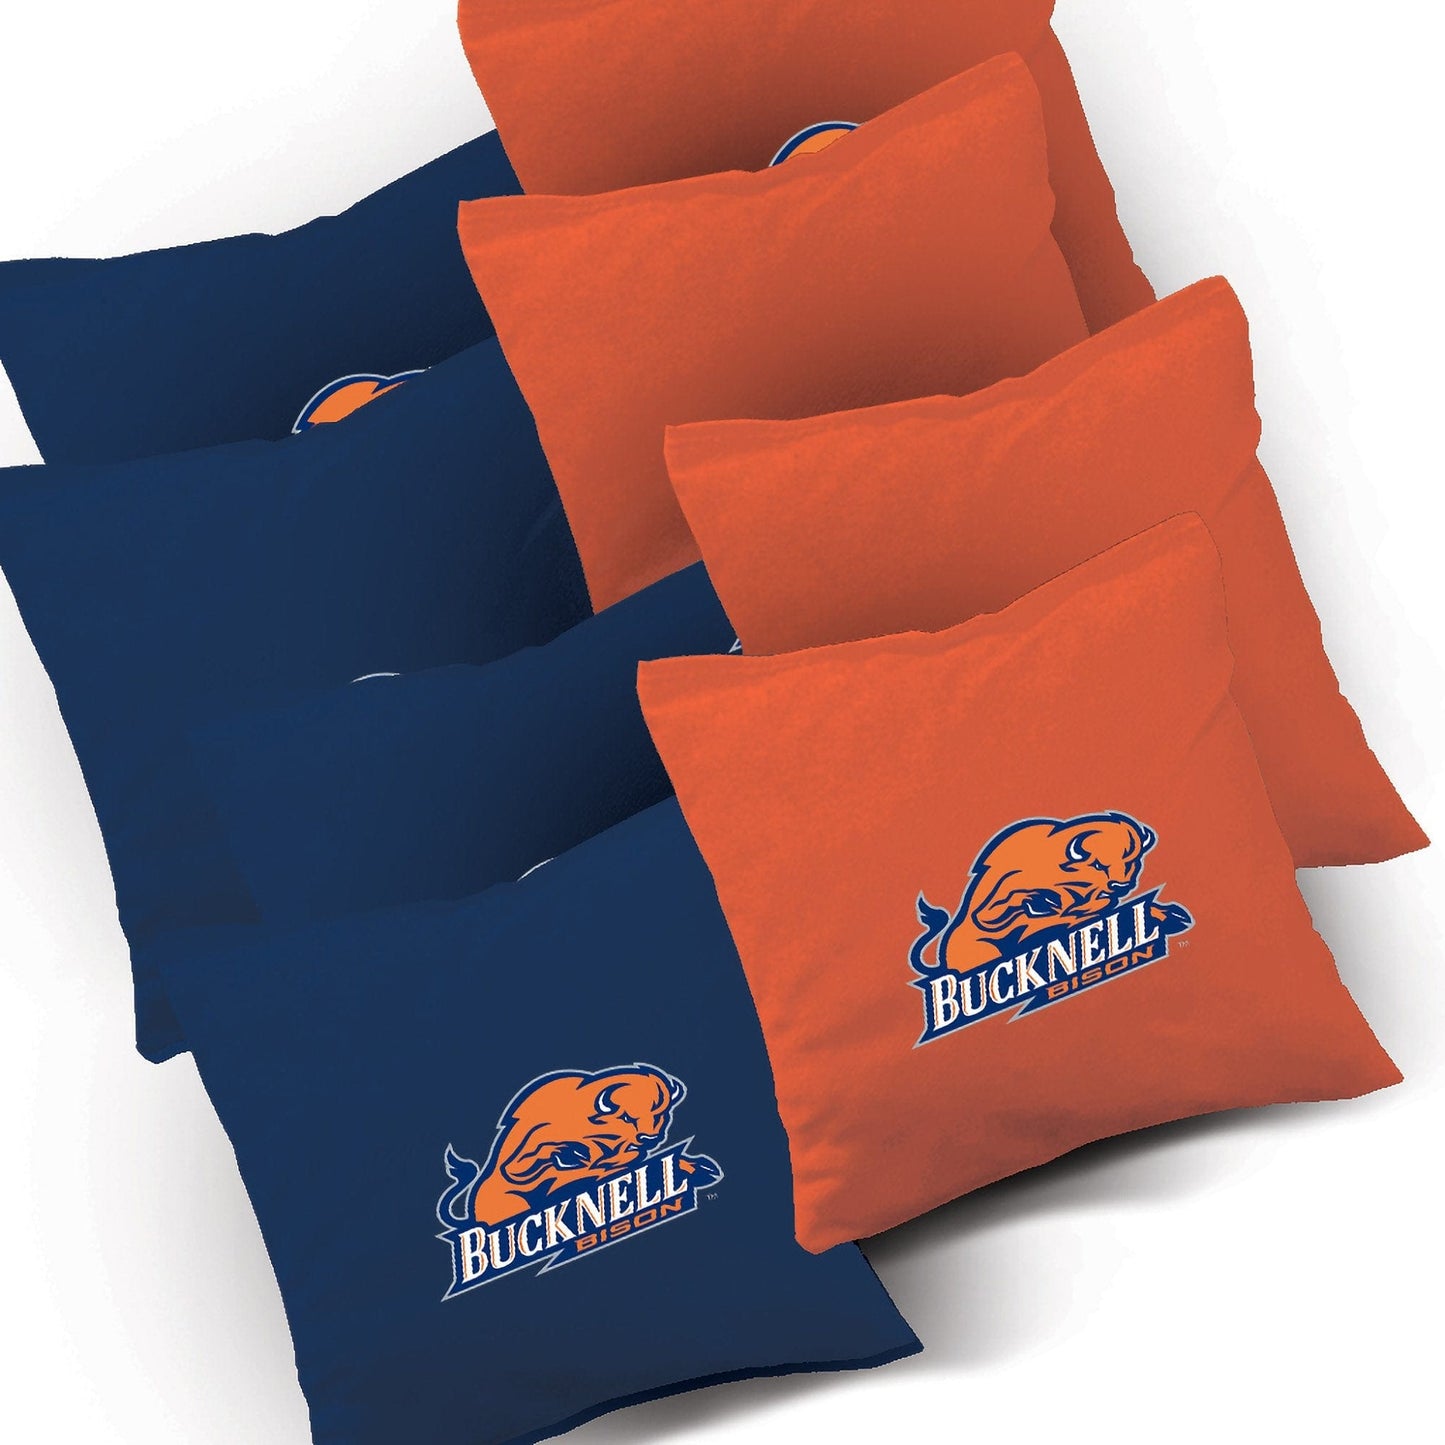 Bucknell Stained Striped team logo bags